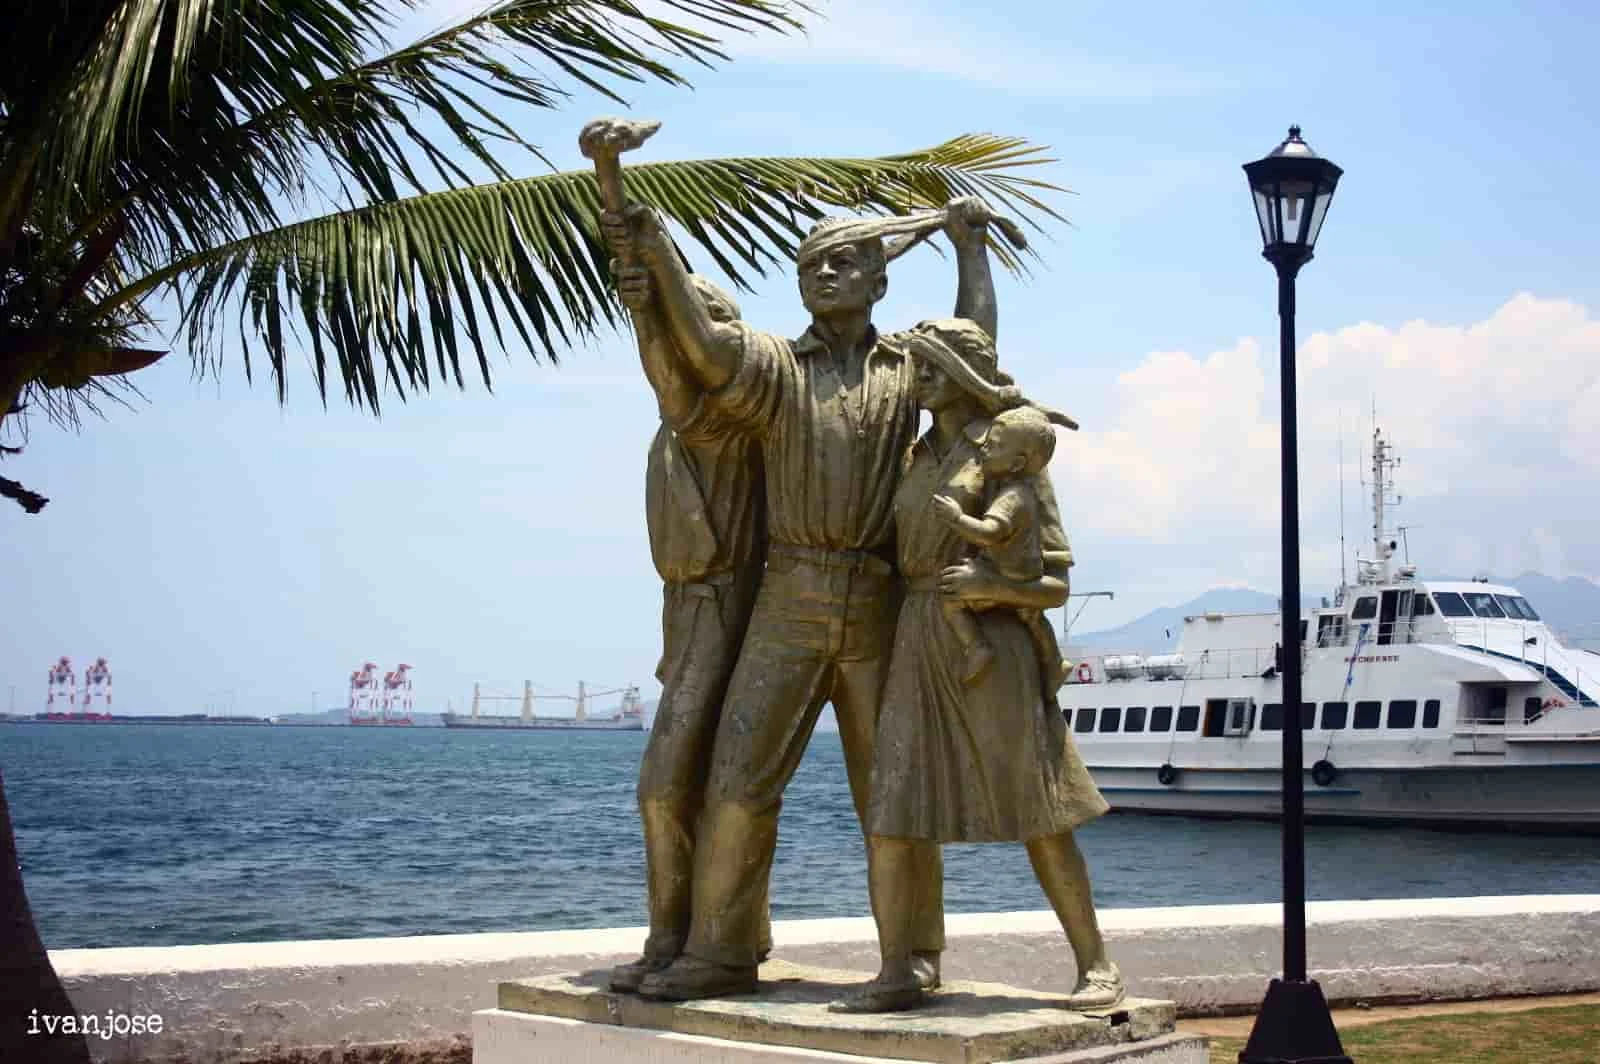 Statues at the port where we waited for the ferry ride going to Grande Island Resort